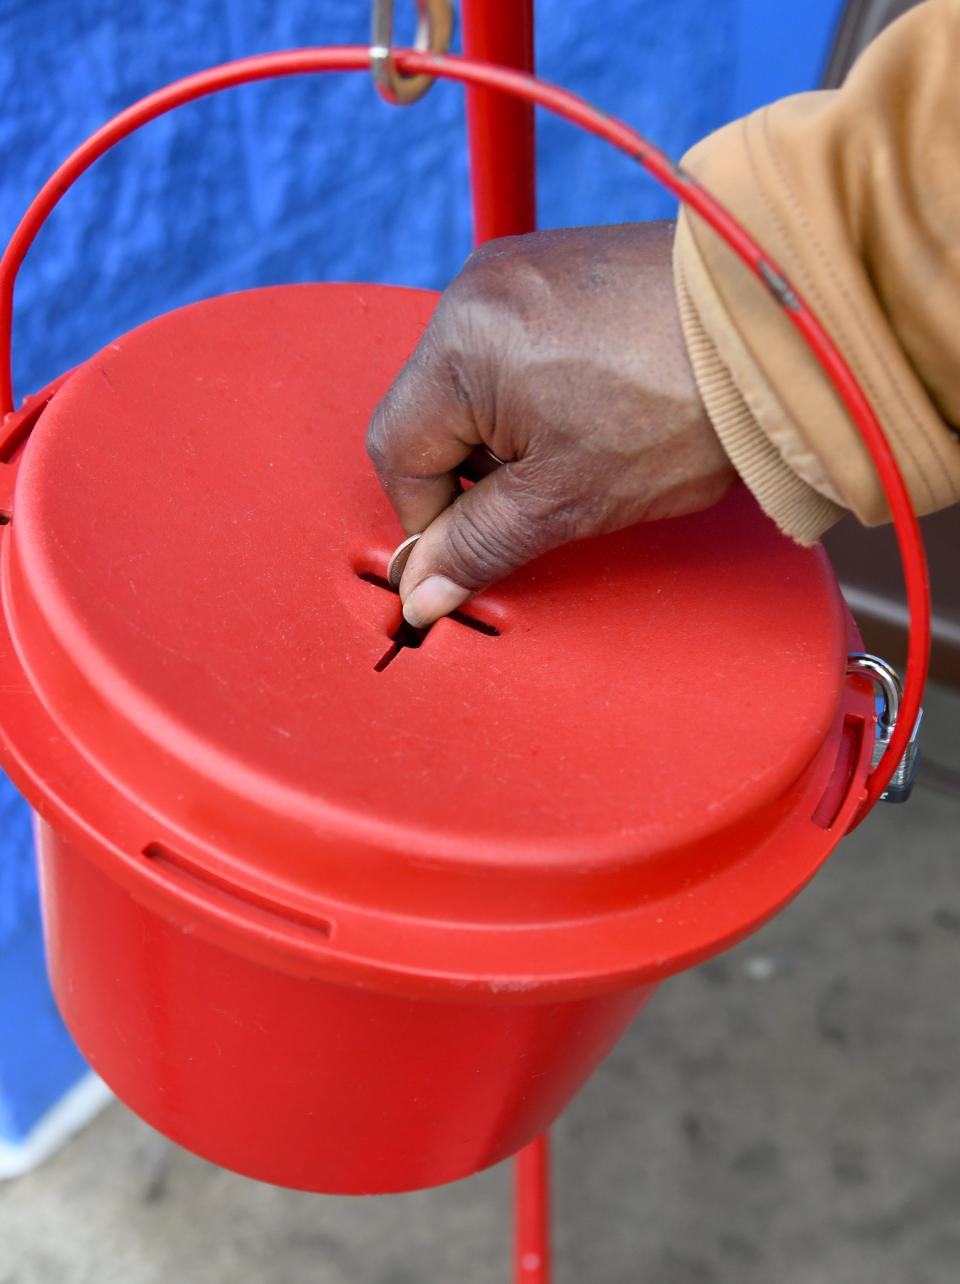 A visitor drops change into a Salvation Army kettle on Wednesday outside the Walmart store on Atlantic Boulevard in Canton.